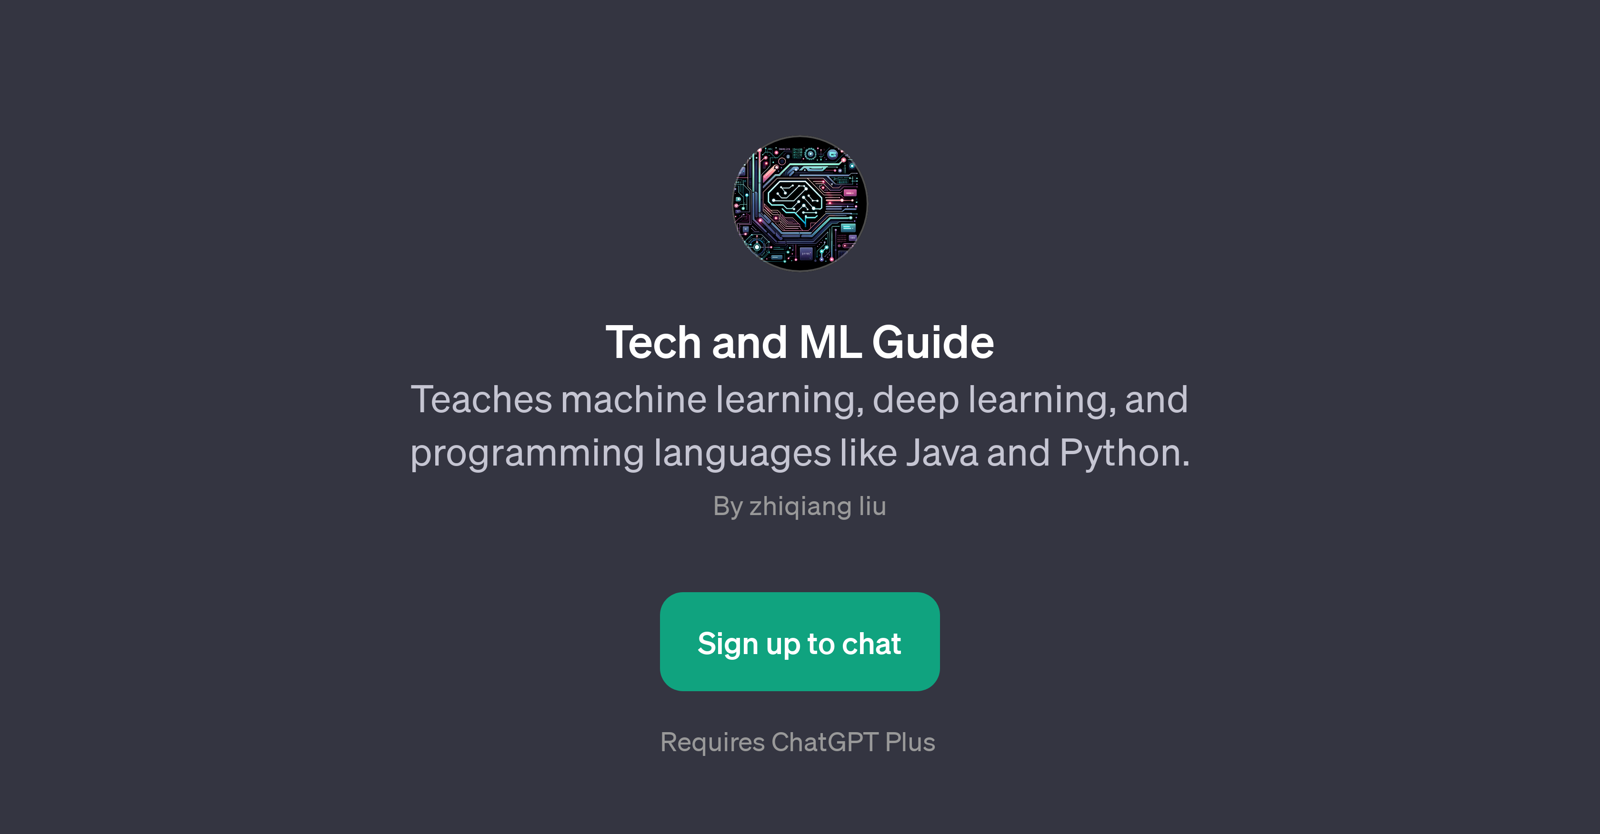 Tech and ML Guide GPT website